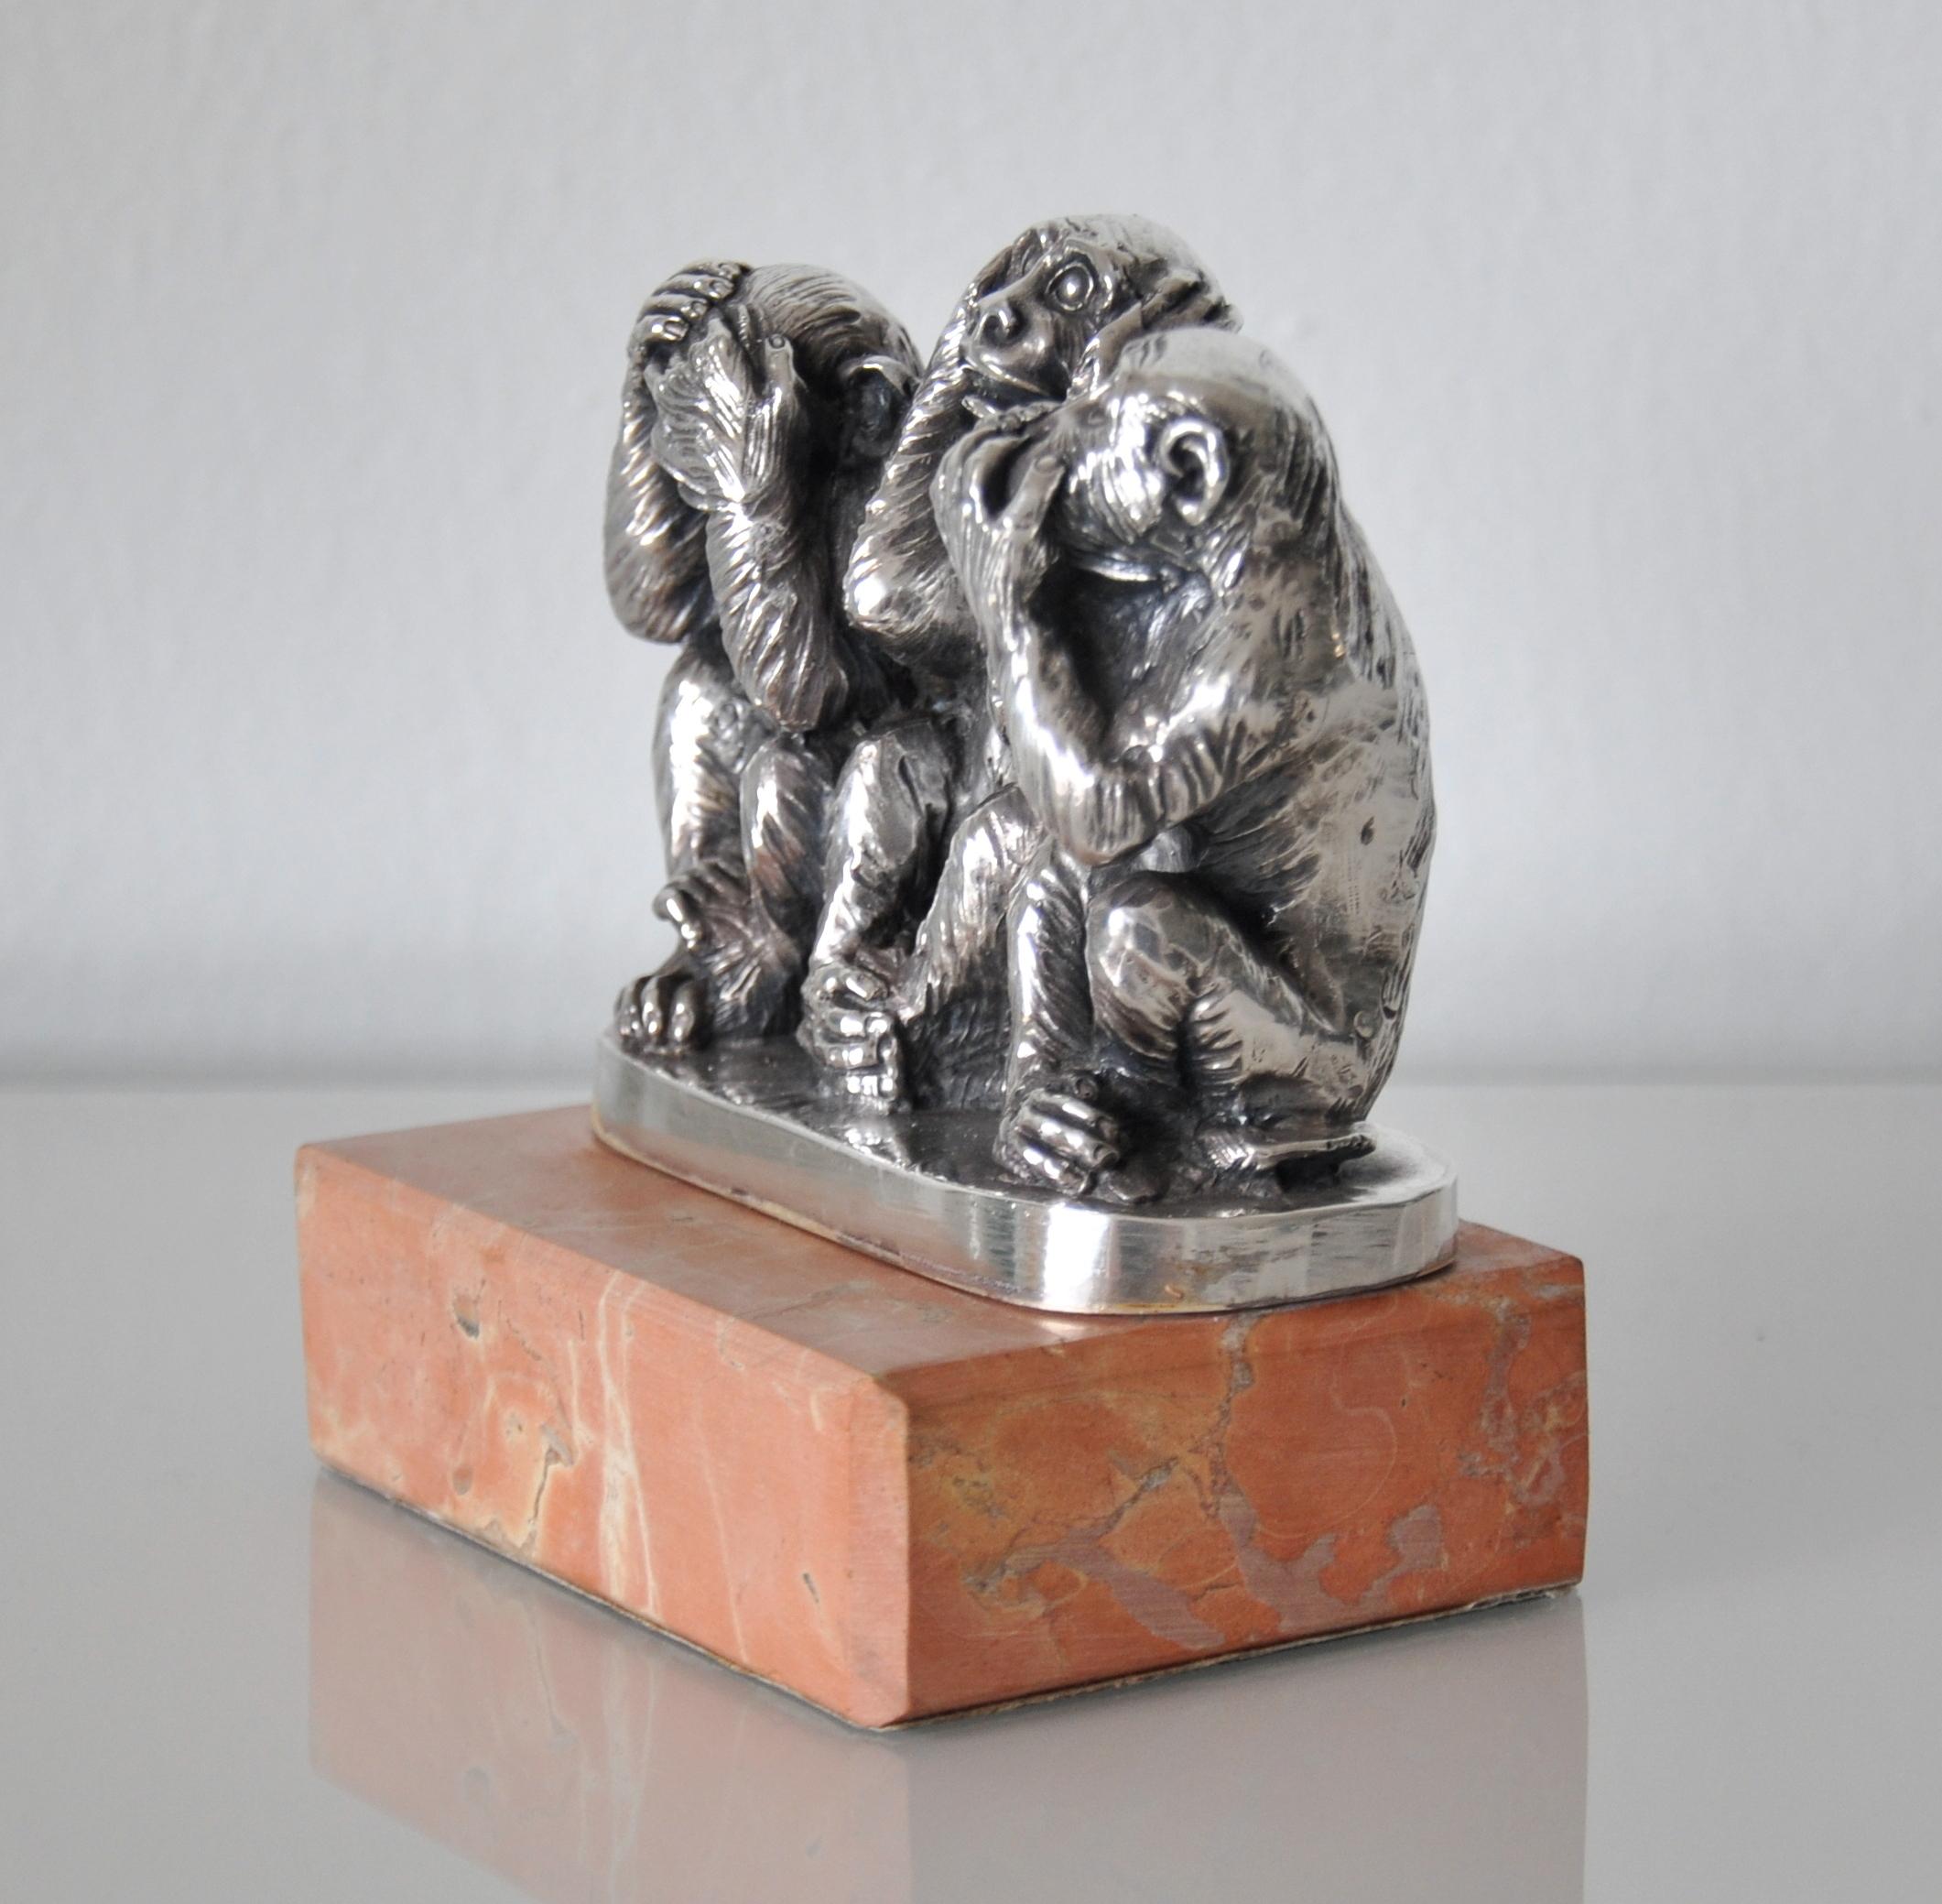 Italian Silver and Marble Three Wise Monkeys Sculpture